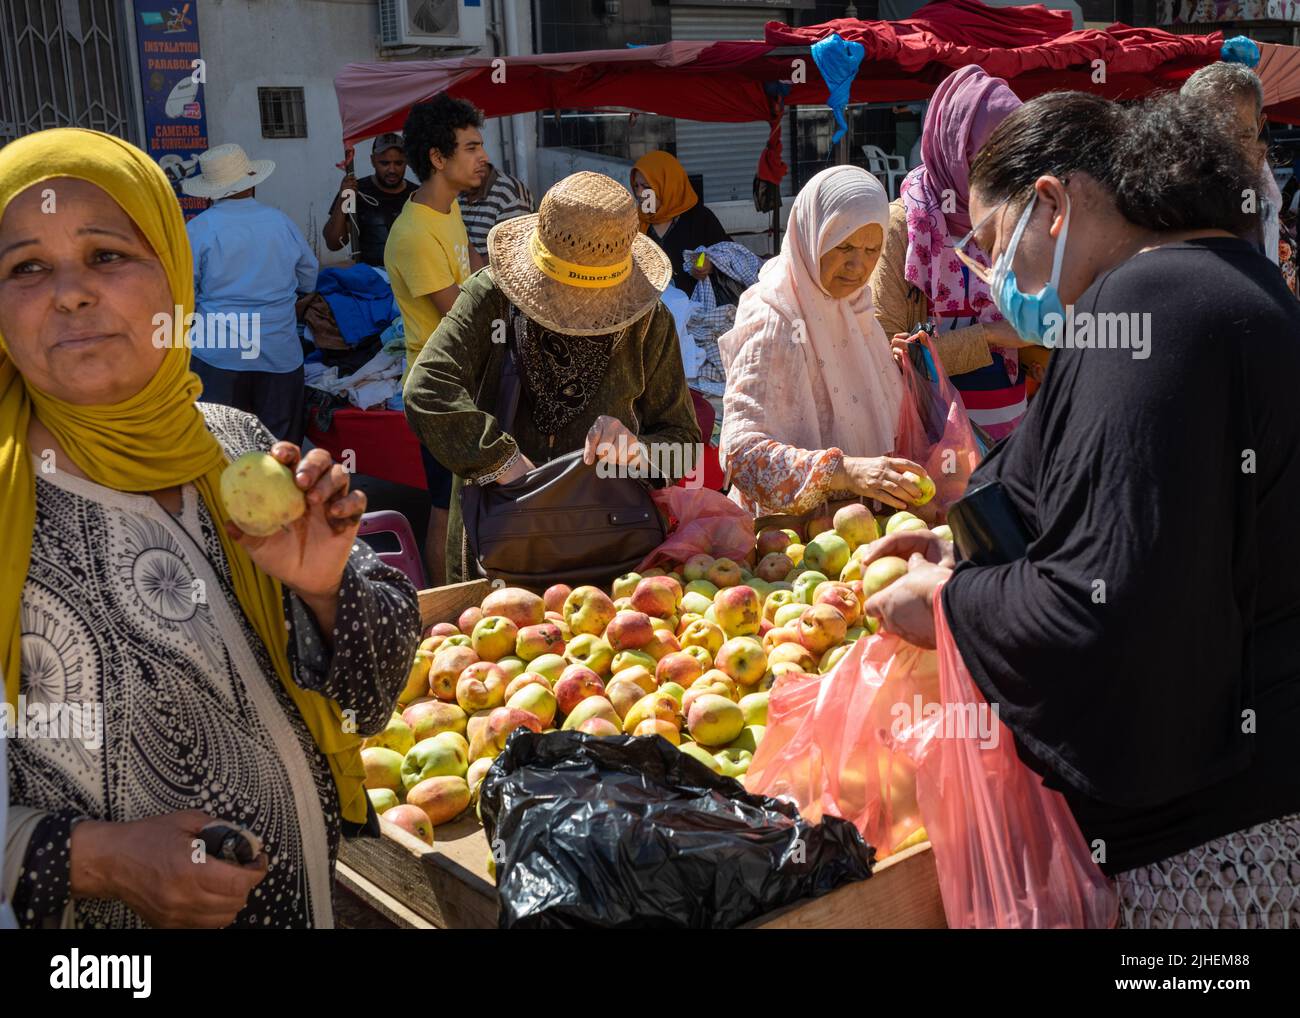 Women buy apples at a fruit stall at the Sunday Souk, a weekly market in Sousse, Tunisia.x Stock Photo